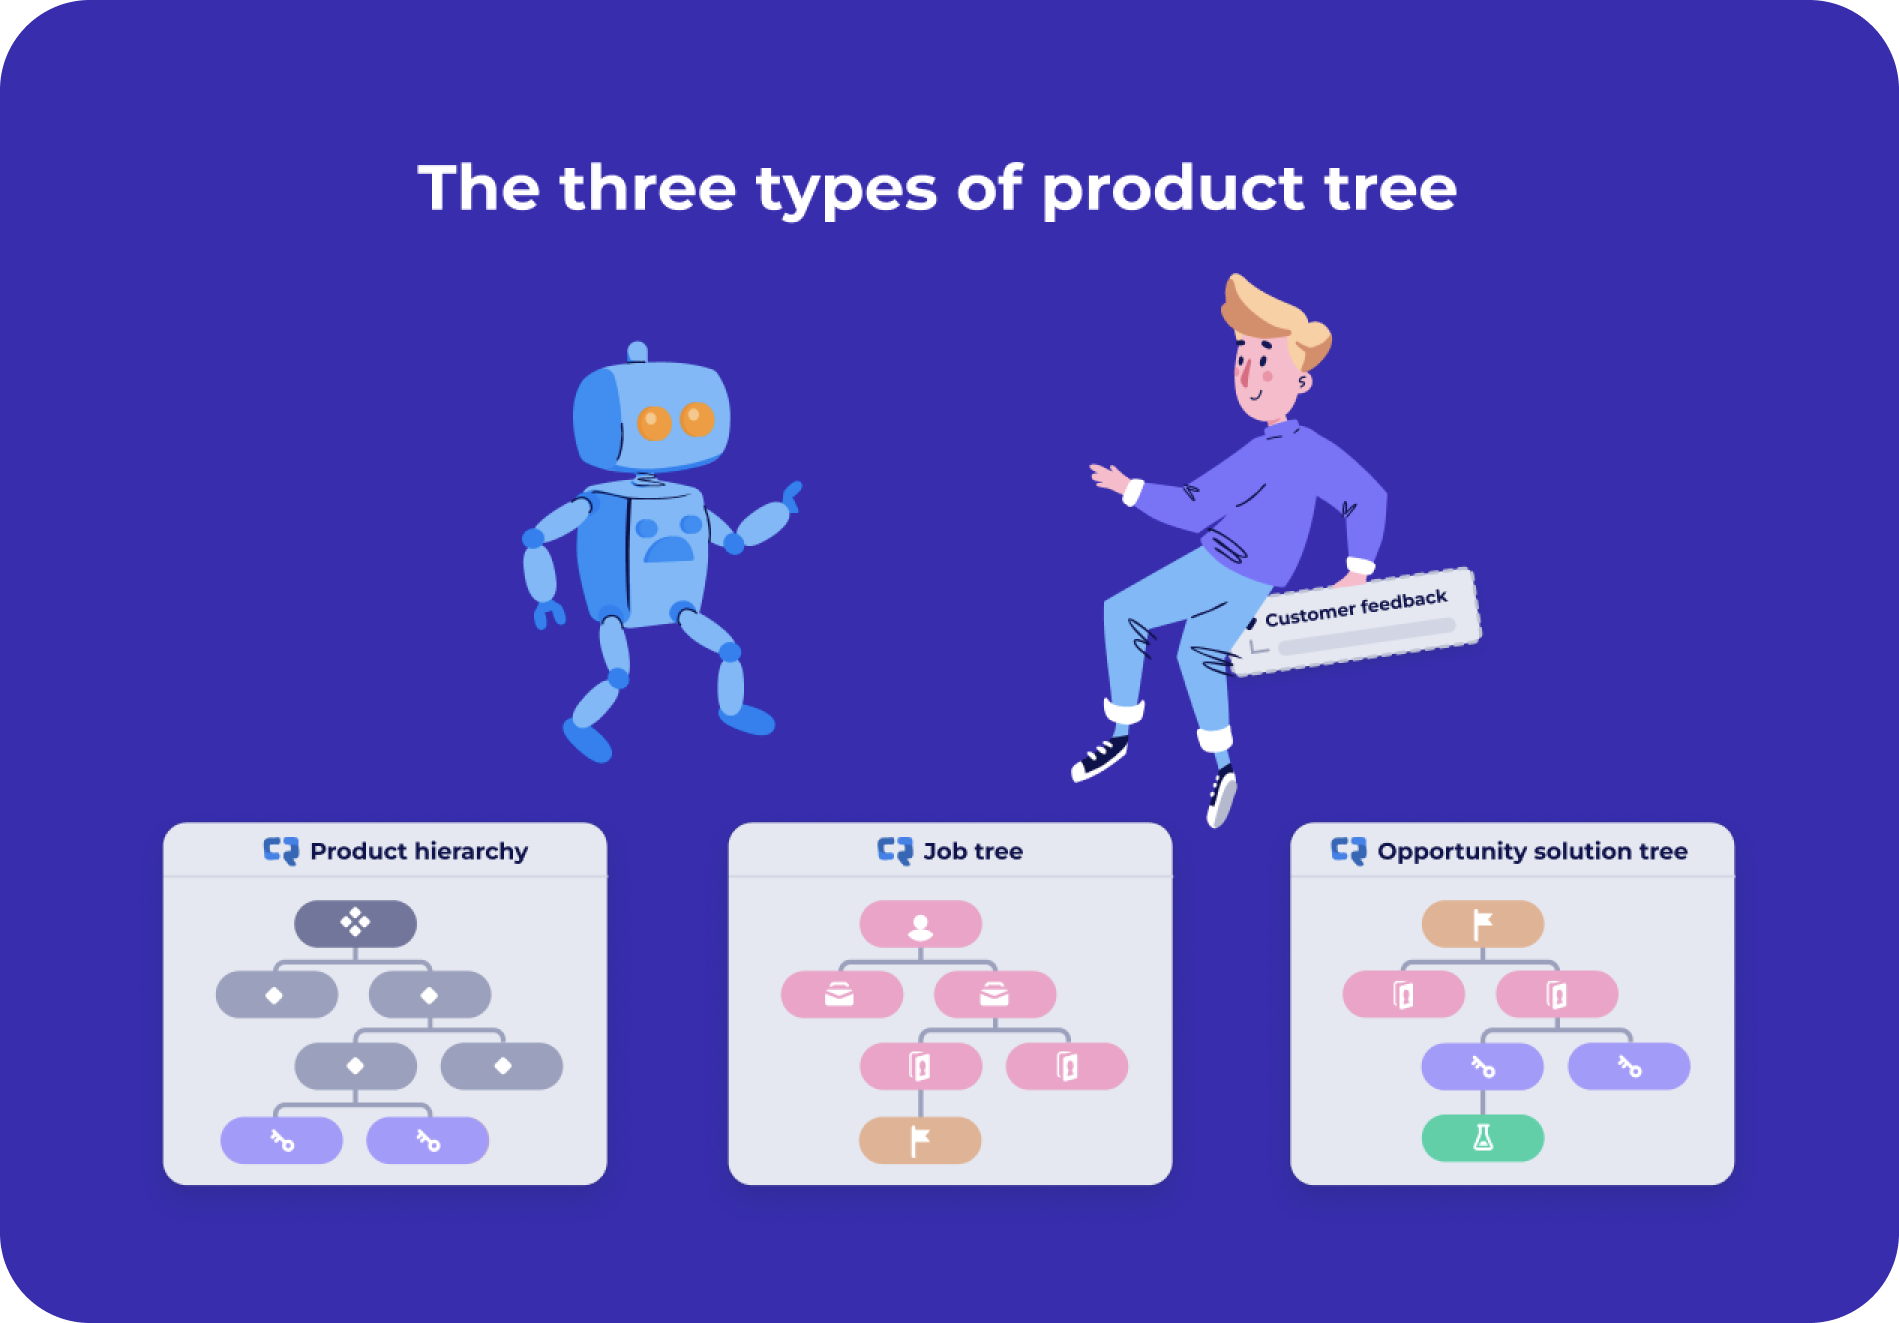 An image showing the three types of product tree